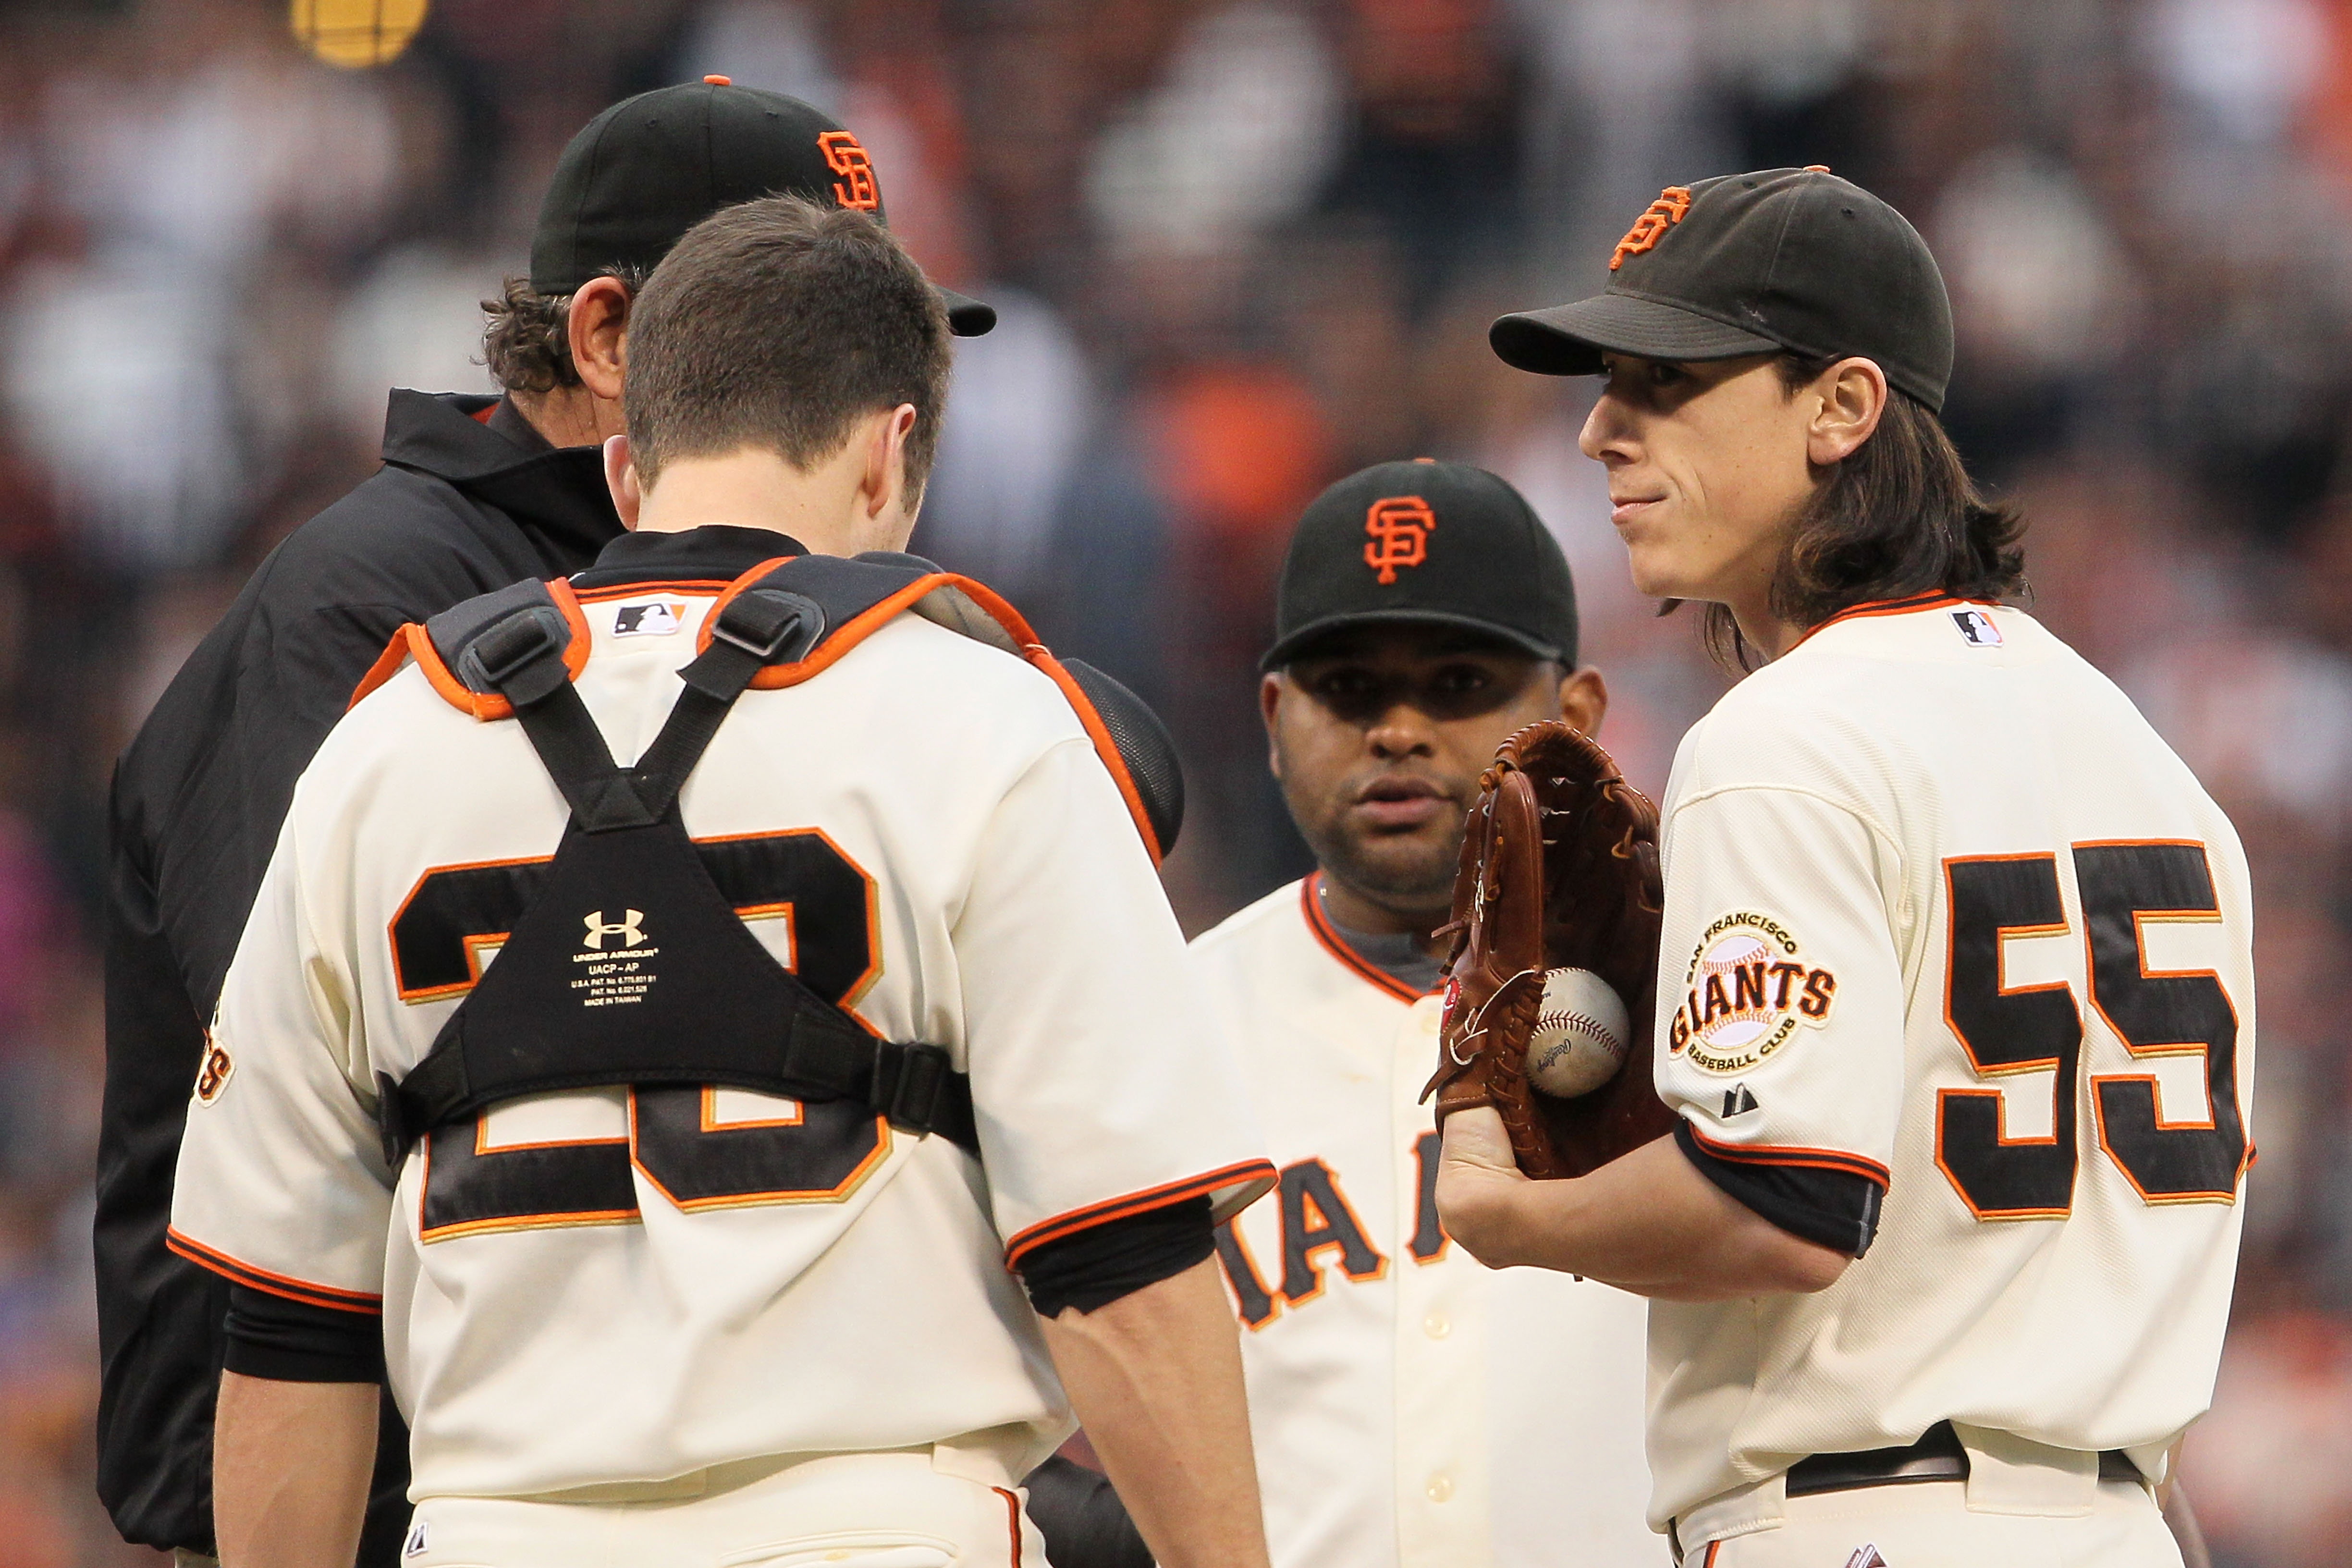 Giants' Bruce Bochy wants Tim Lincecum to visit spring camp